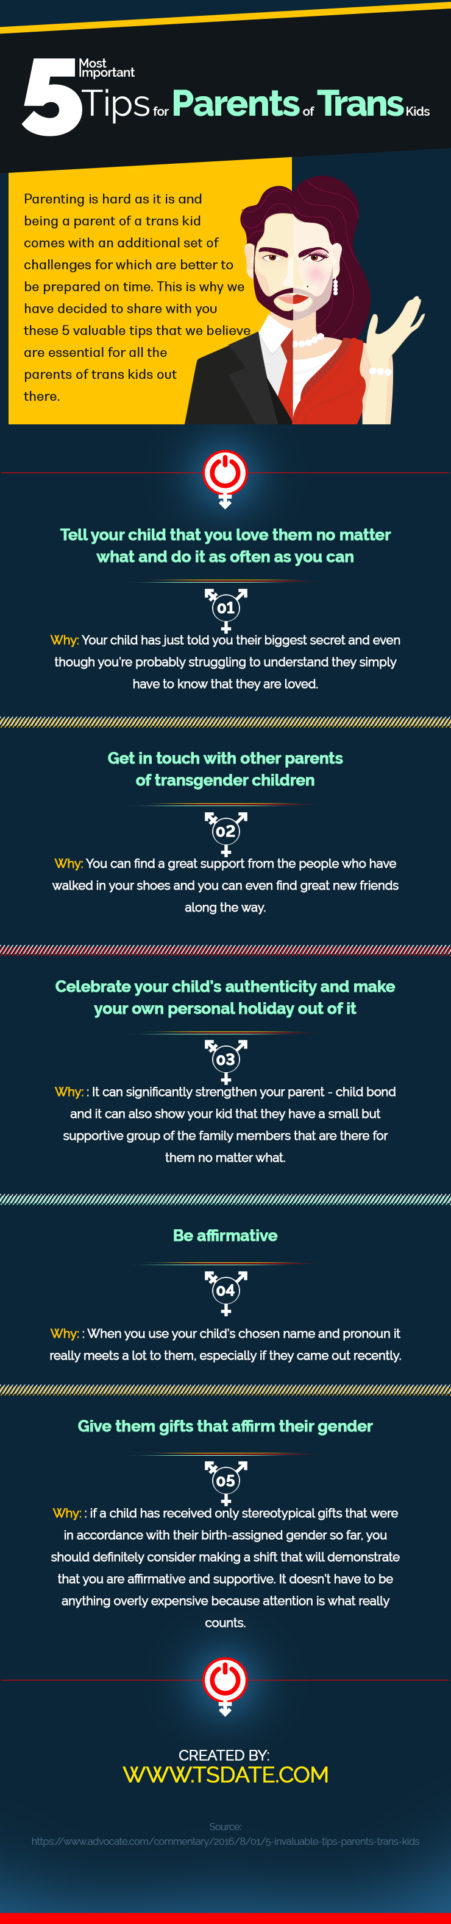 5 Most Important Tips for Parents of Trans Kids